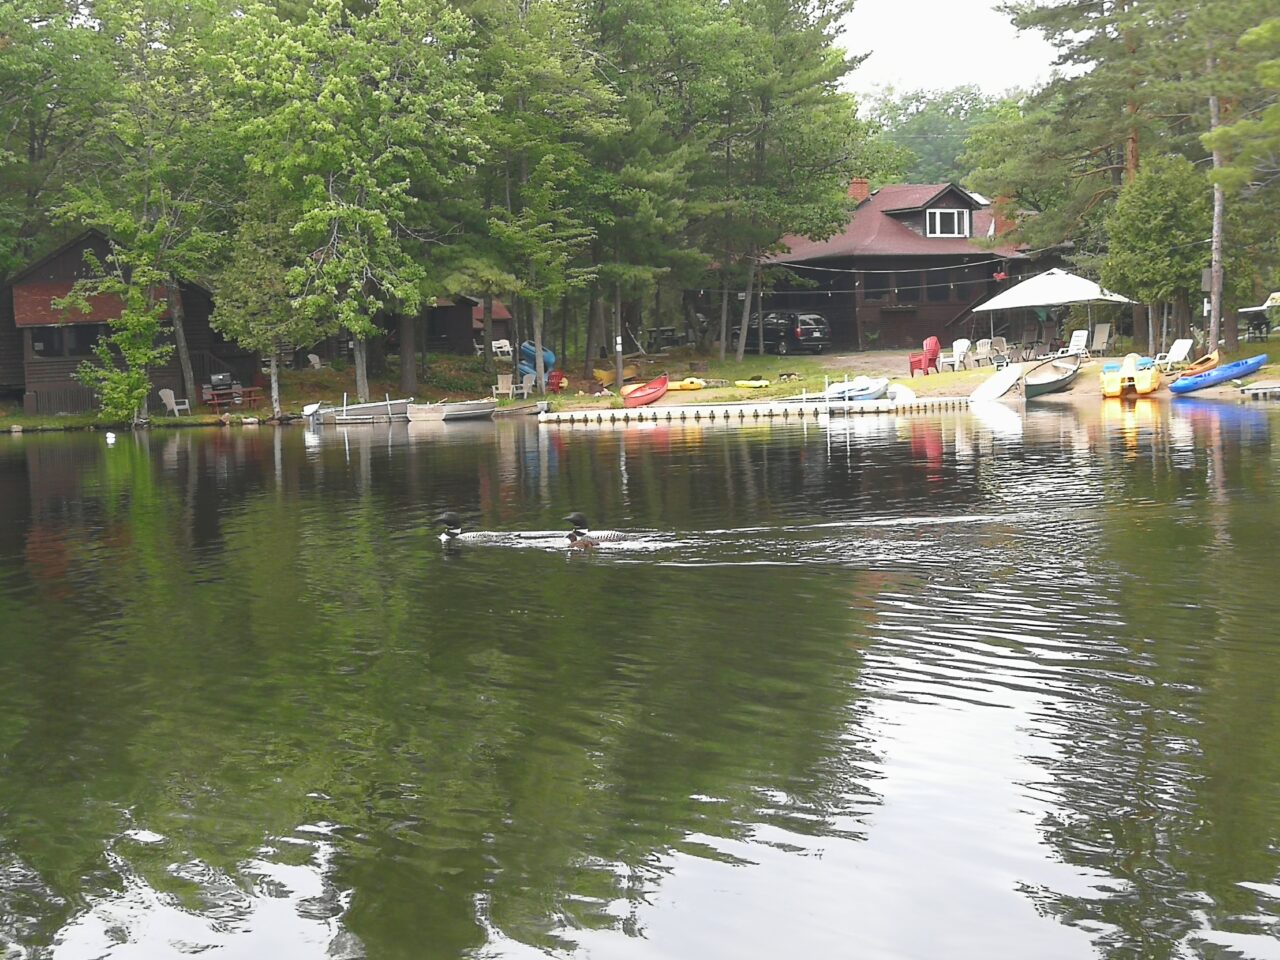 Loons swimming in a lake in front of a cottage beach with kayaks